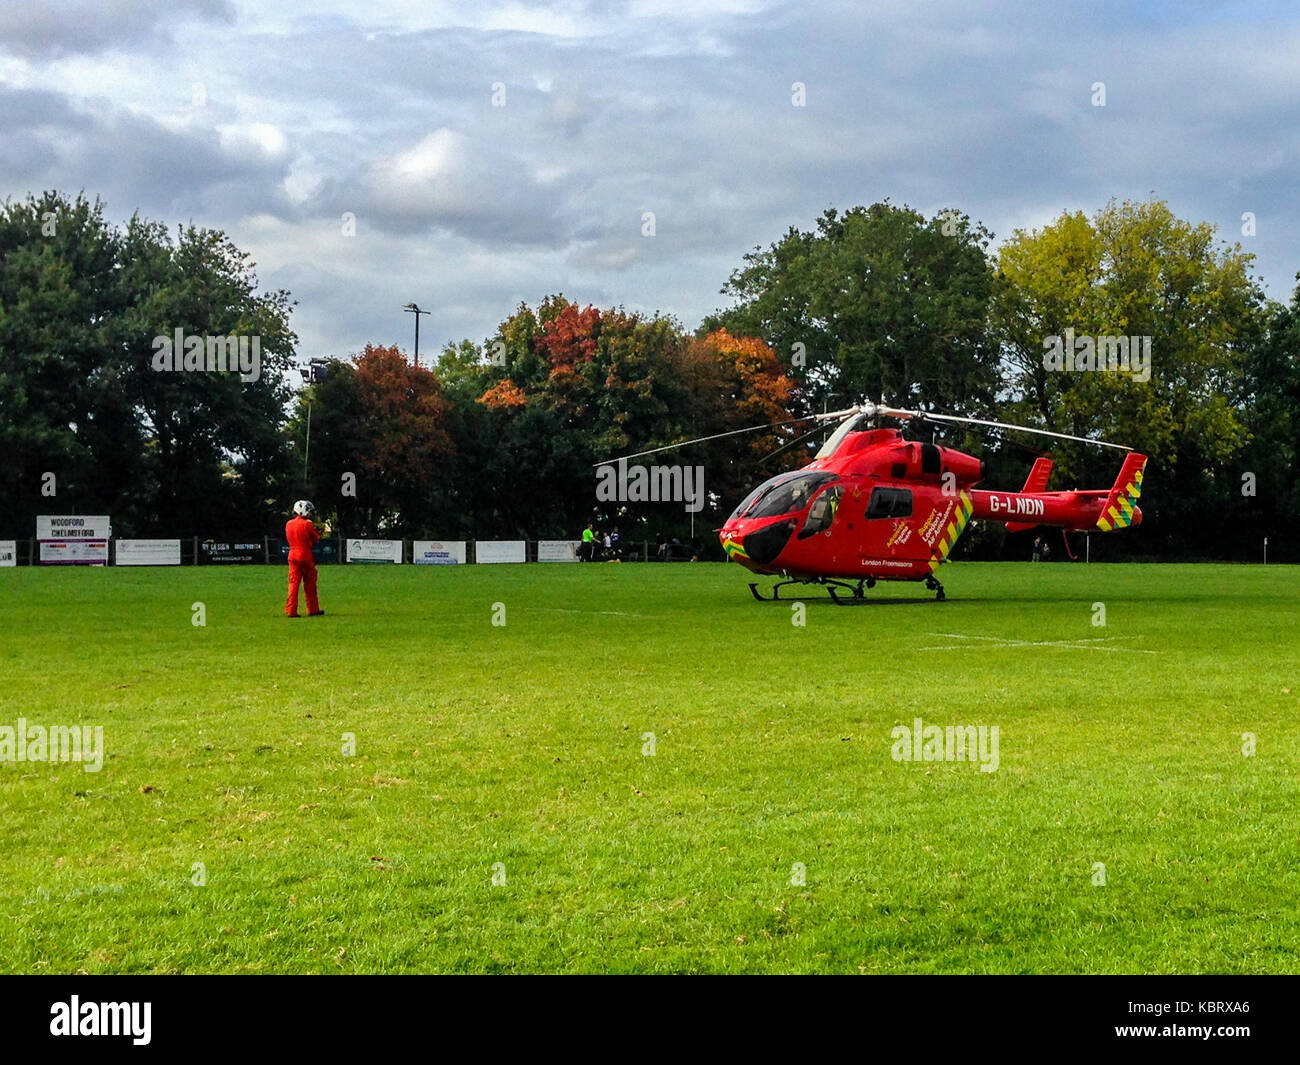 Woodford Green, London, UK. 30th September 2017. London’s  Air Ambulance helicopter G-LNDN lands at Woodford Rugby Football Club's Highams ground in Woodford Green in response to a report of a spectator suffering a heart attack. The Woodford v Chelmsford match was suspended for 40 minutes whilst paramedics attended to the casualty who was able to leave by road.  Woodford went on to win the match. The Air Ambulance is supported by London Freemasons.  Credit: Mark Dunn/ Alamy Live News Stock Photo